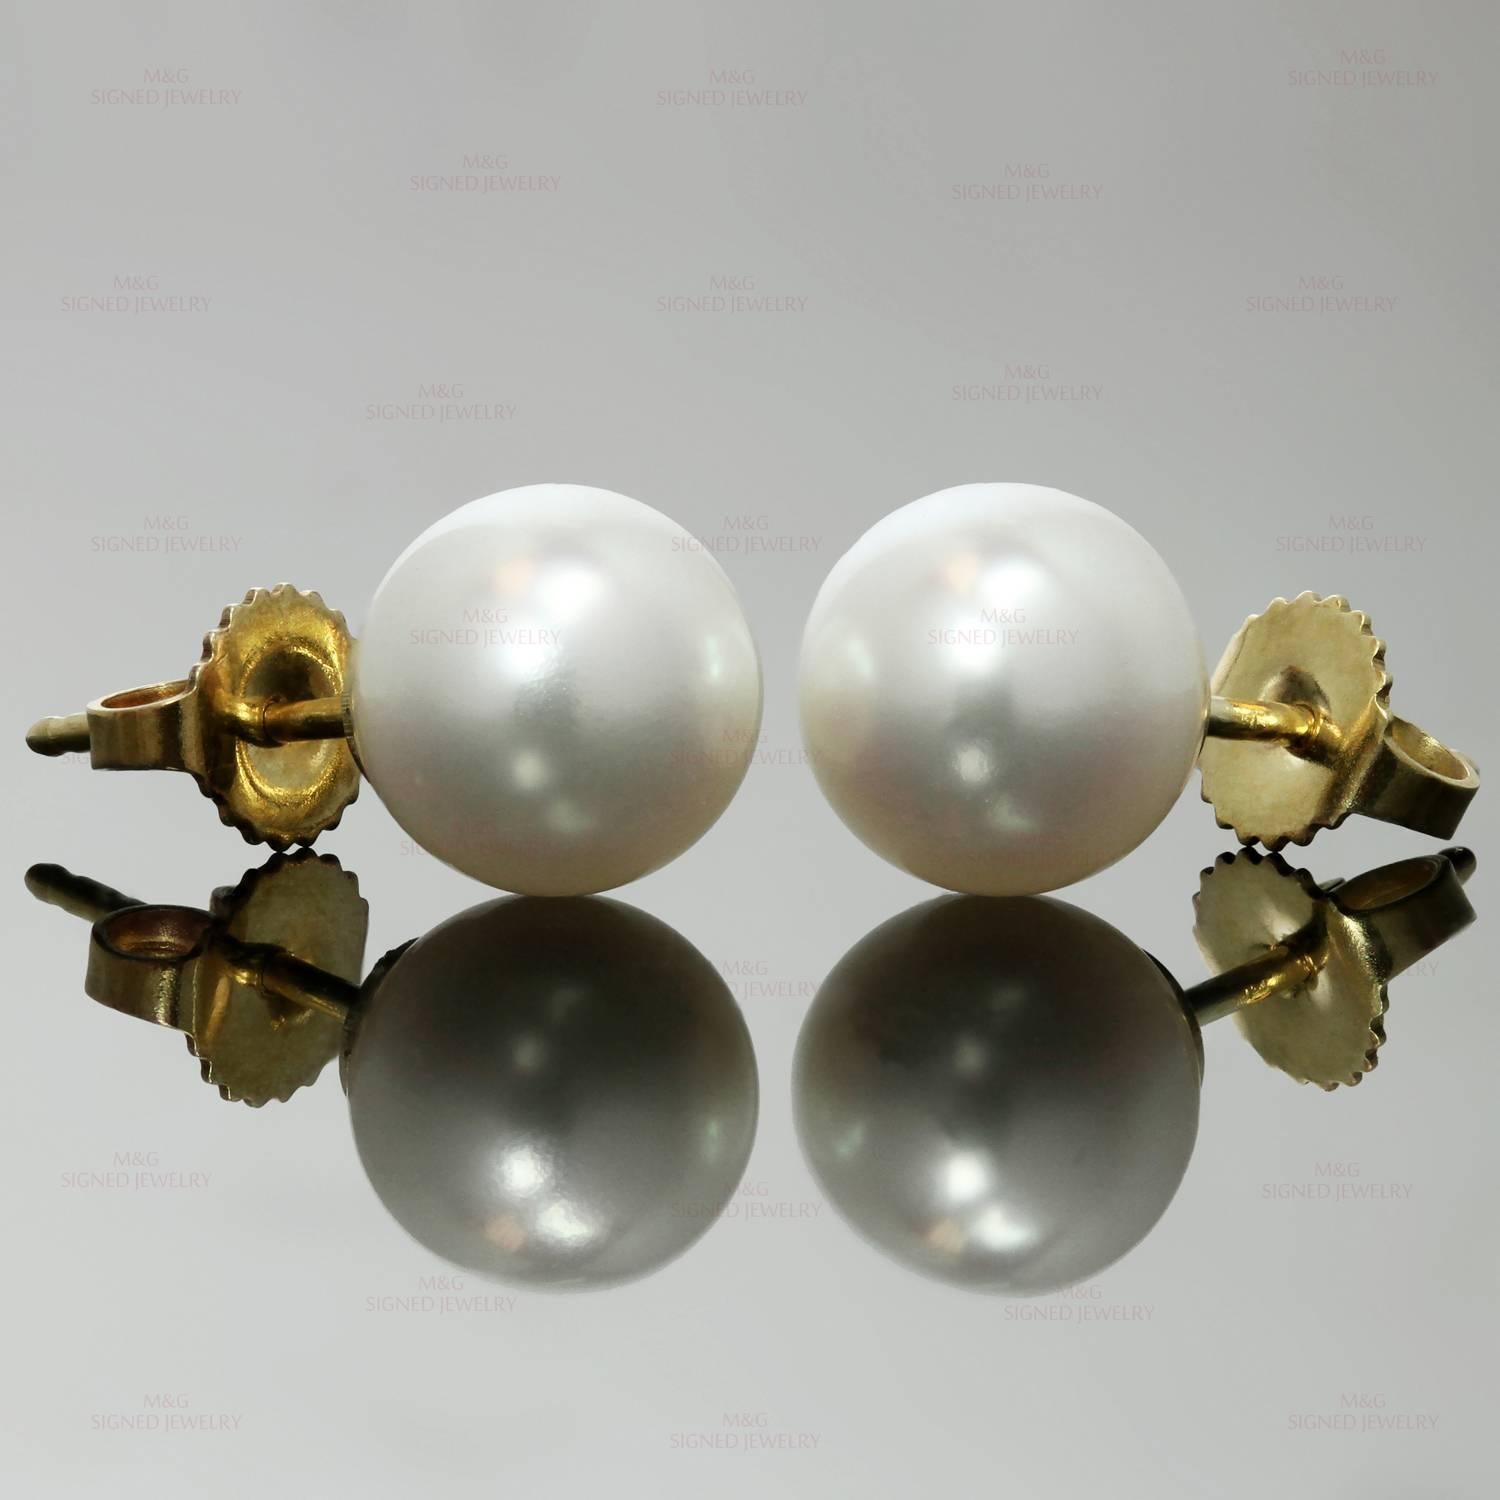 These classic Tiffany earrings are crafted in 18k yellow gold and set with Akoya Cultured Pearls measuring between 8.5mm to 9.0mm.  Made in United States circa 2000s. Measurements: 0.35" (9mm) width. 